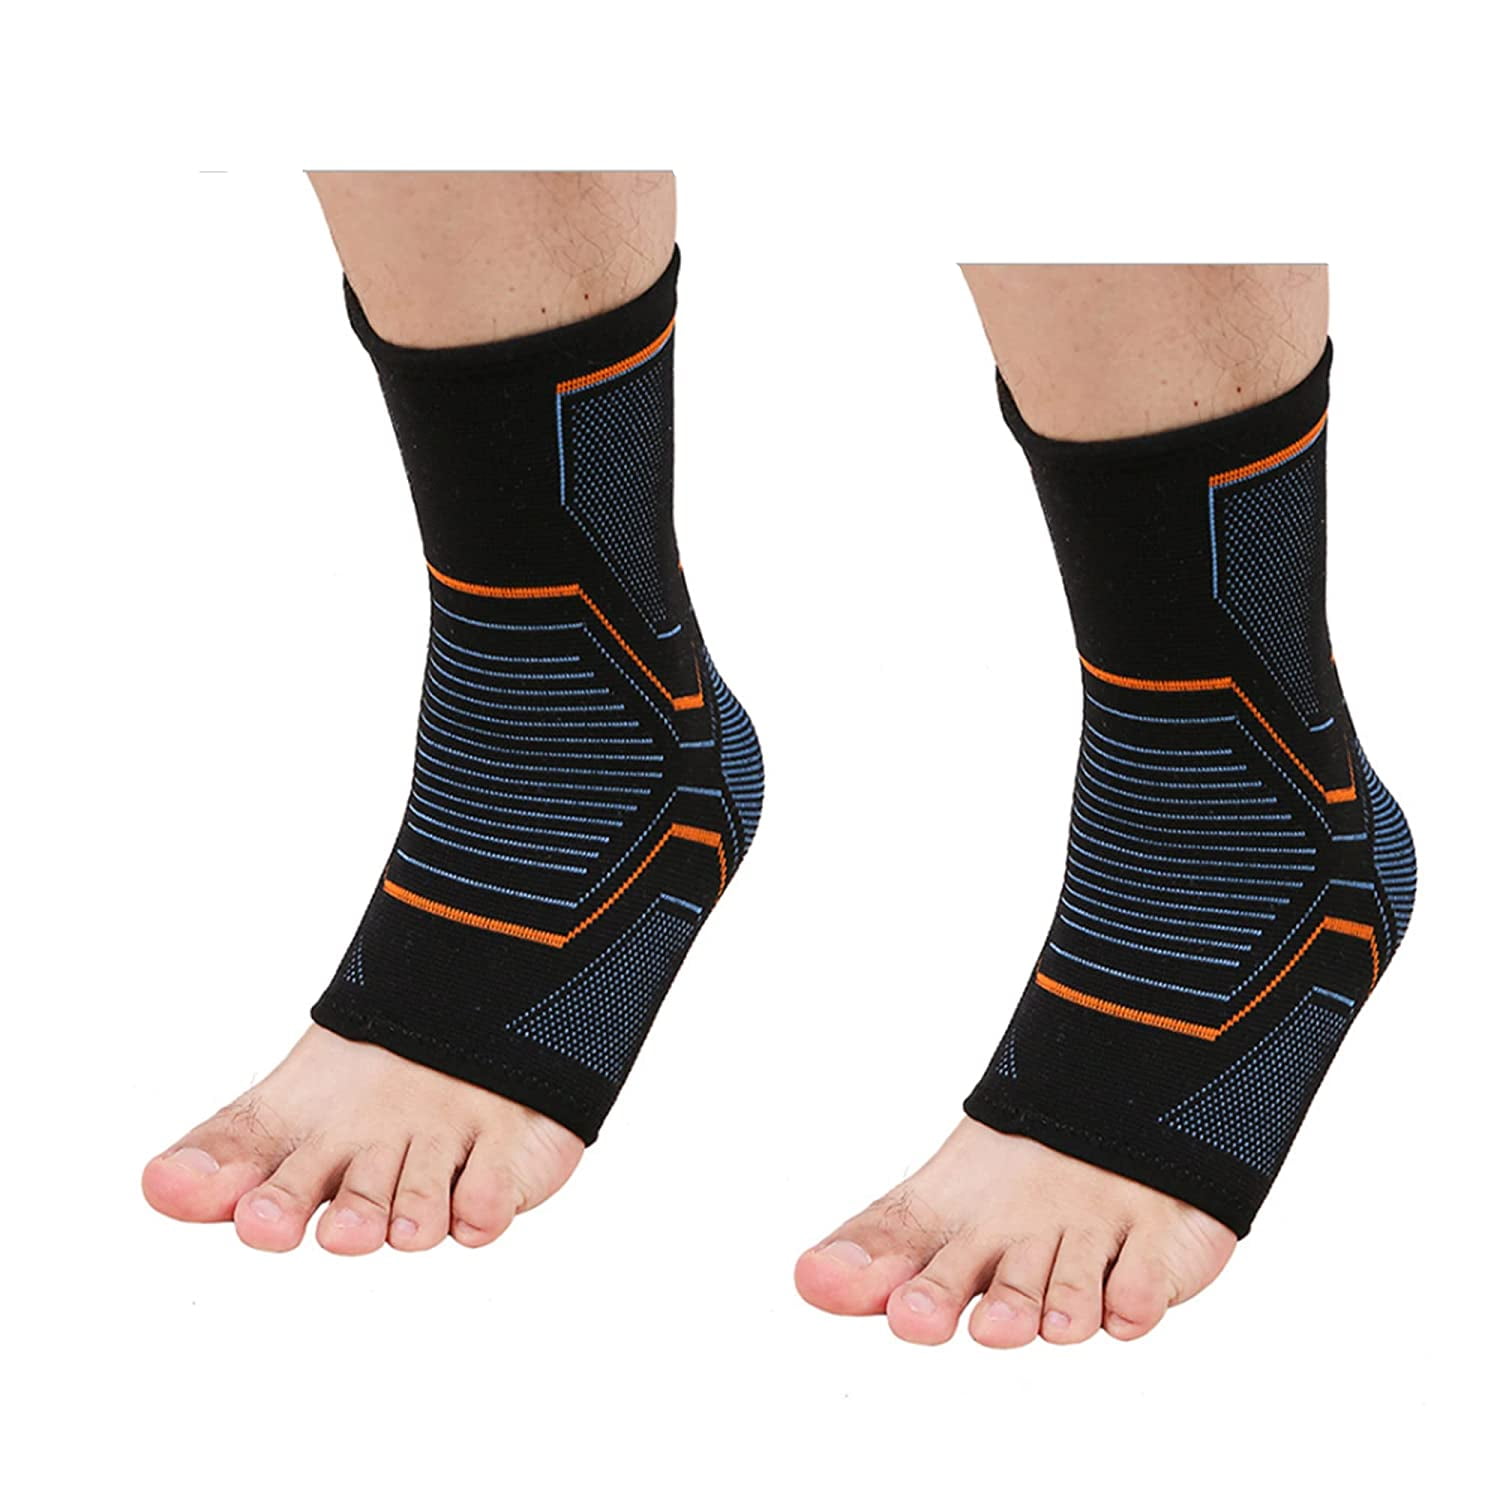 Elastic & Breathable Ankle Support Compression Sleeves Ankle Stabilizer/Foot Protection Socks with Silicone Pad for Sprain Relieves Pain Running Men Women Single Medium Ankle Brace